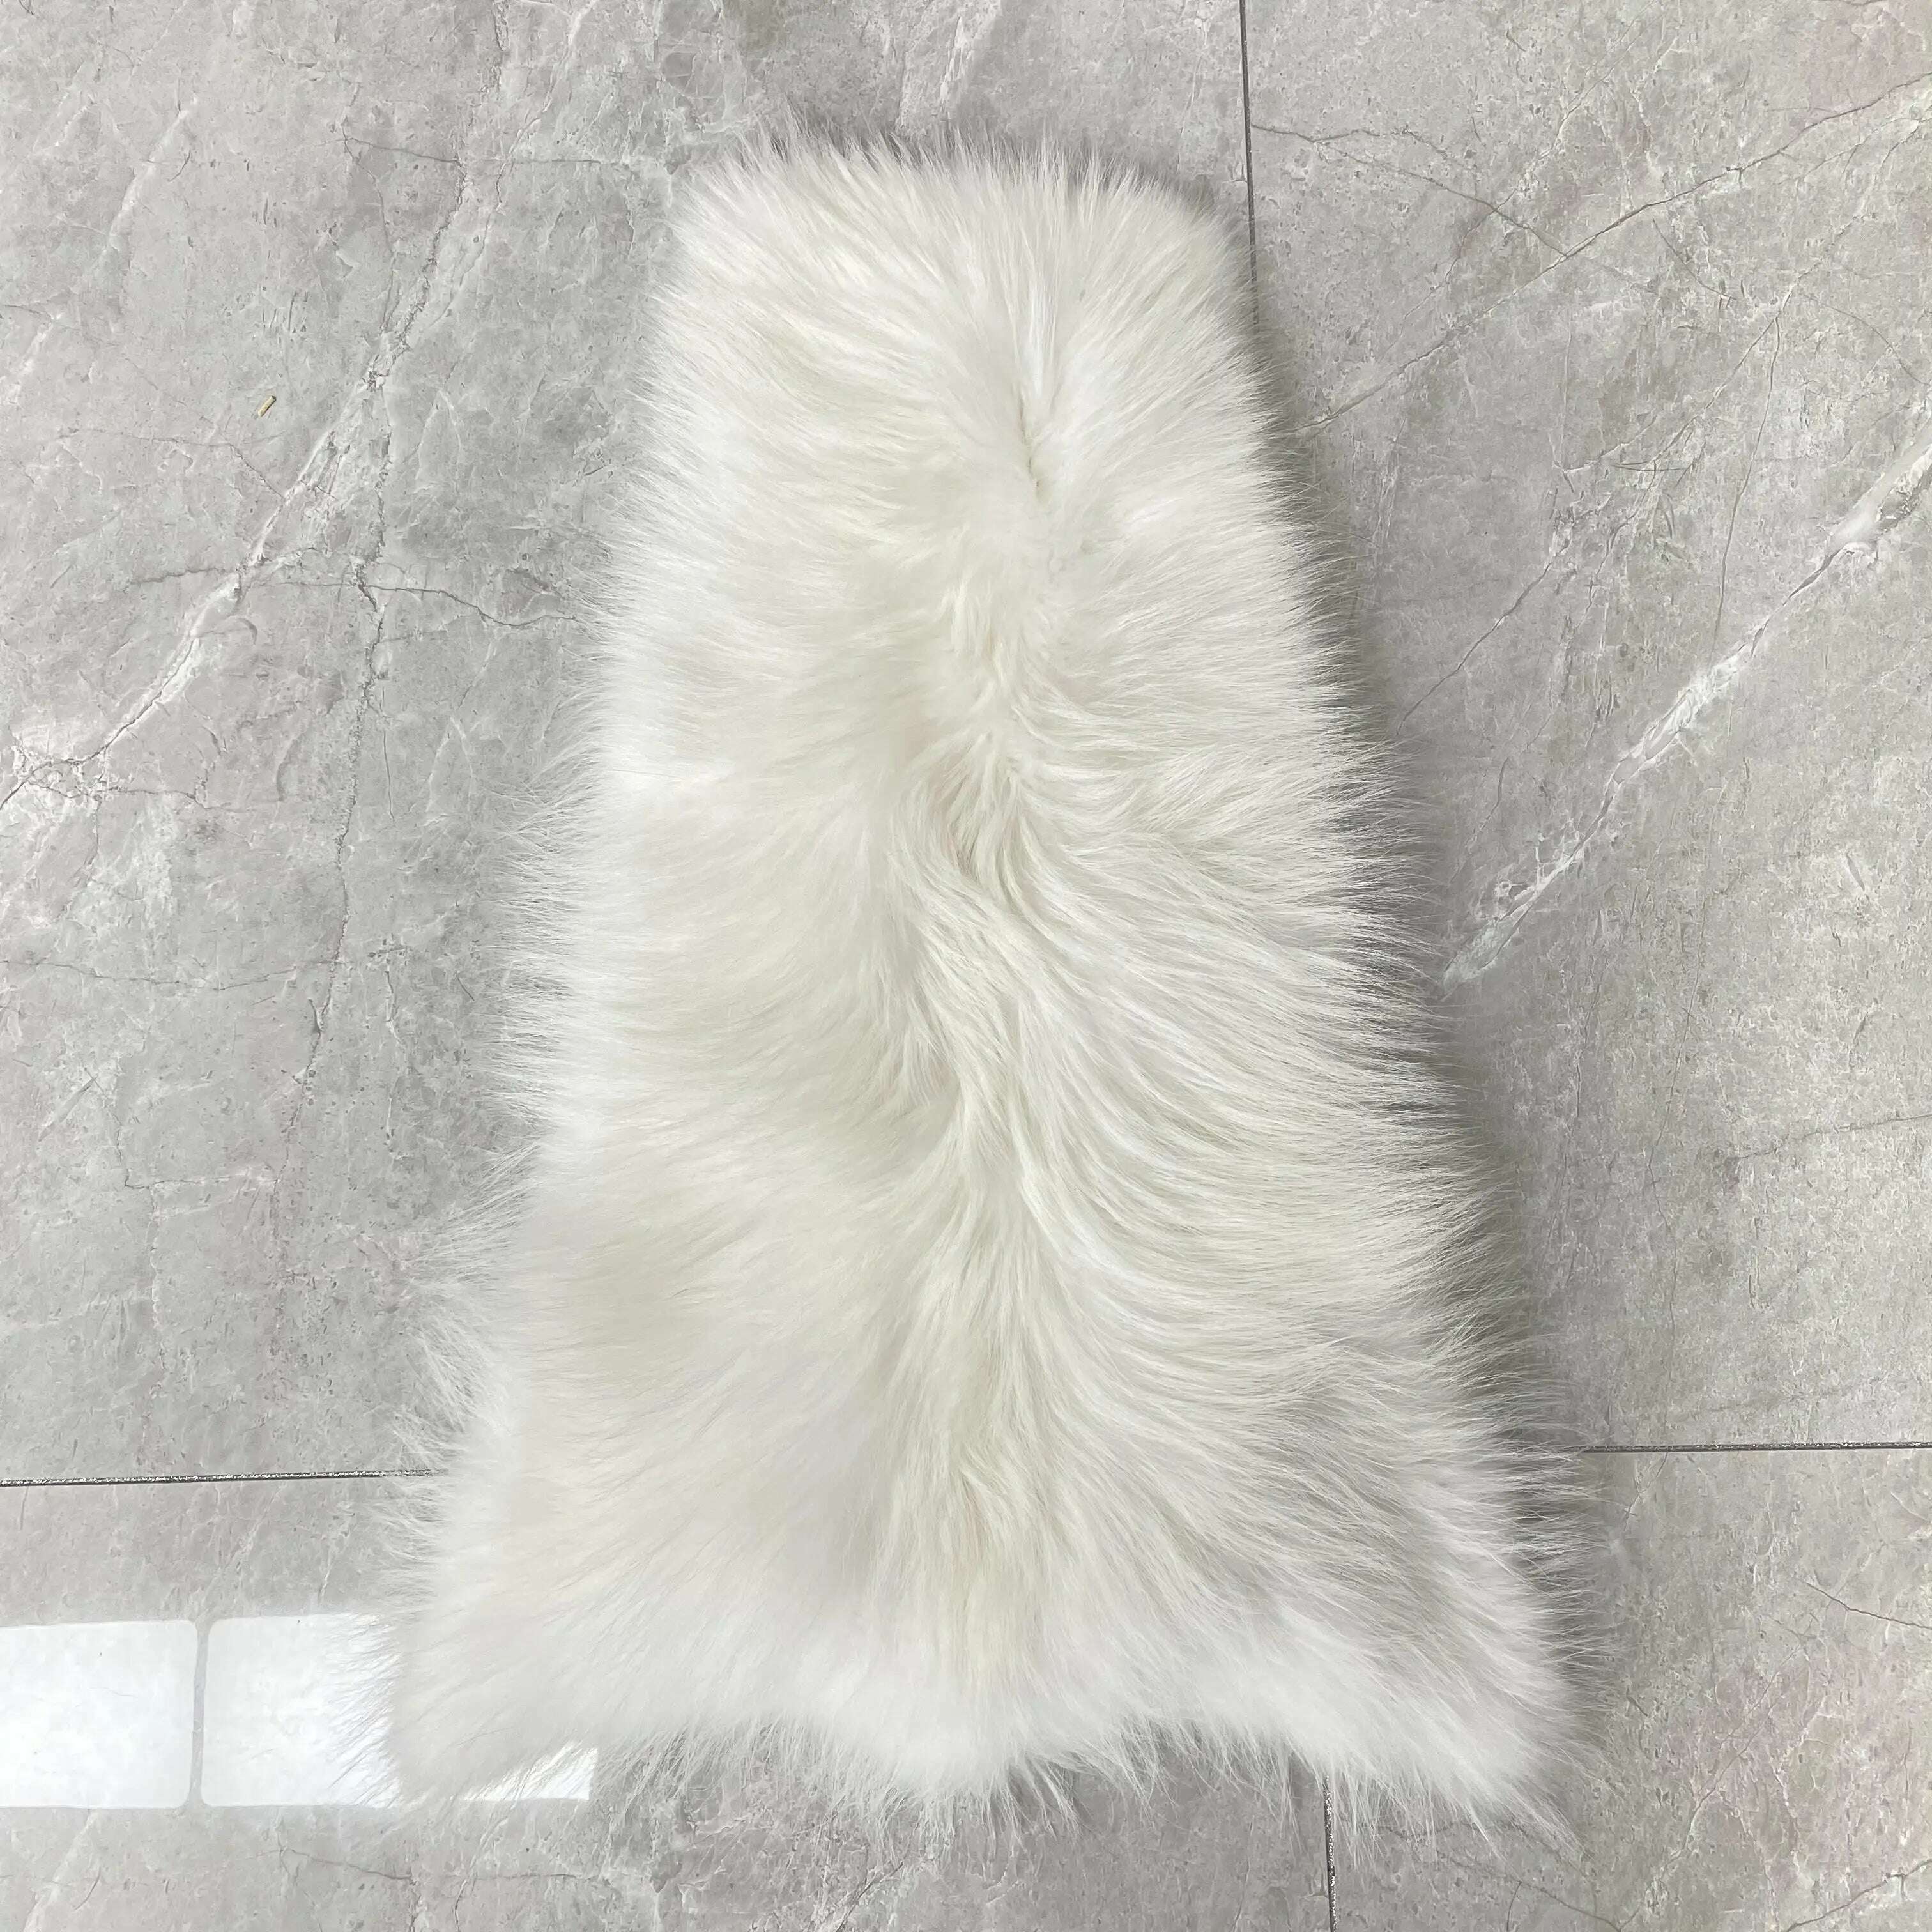 KIMLUD, Men Clothes Golden Island White Special Fox Fur Coat Full Pelt Customized Size Available, White / XS(88cm), KIMLUD Womens Clothes